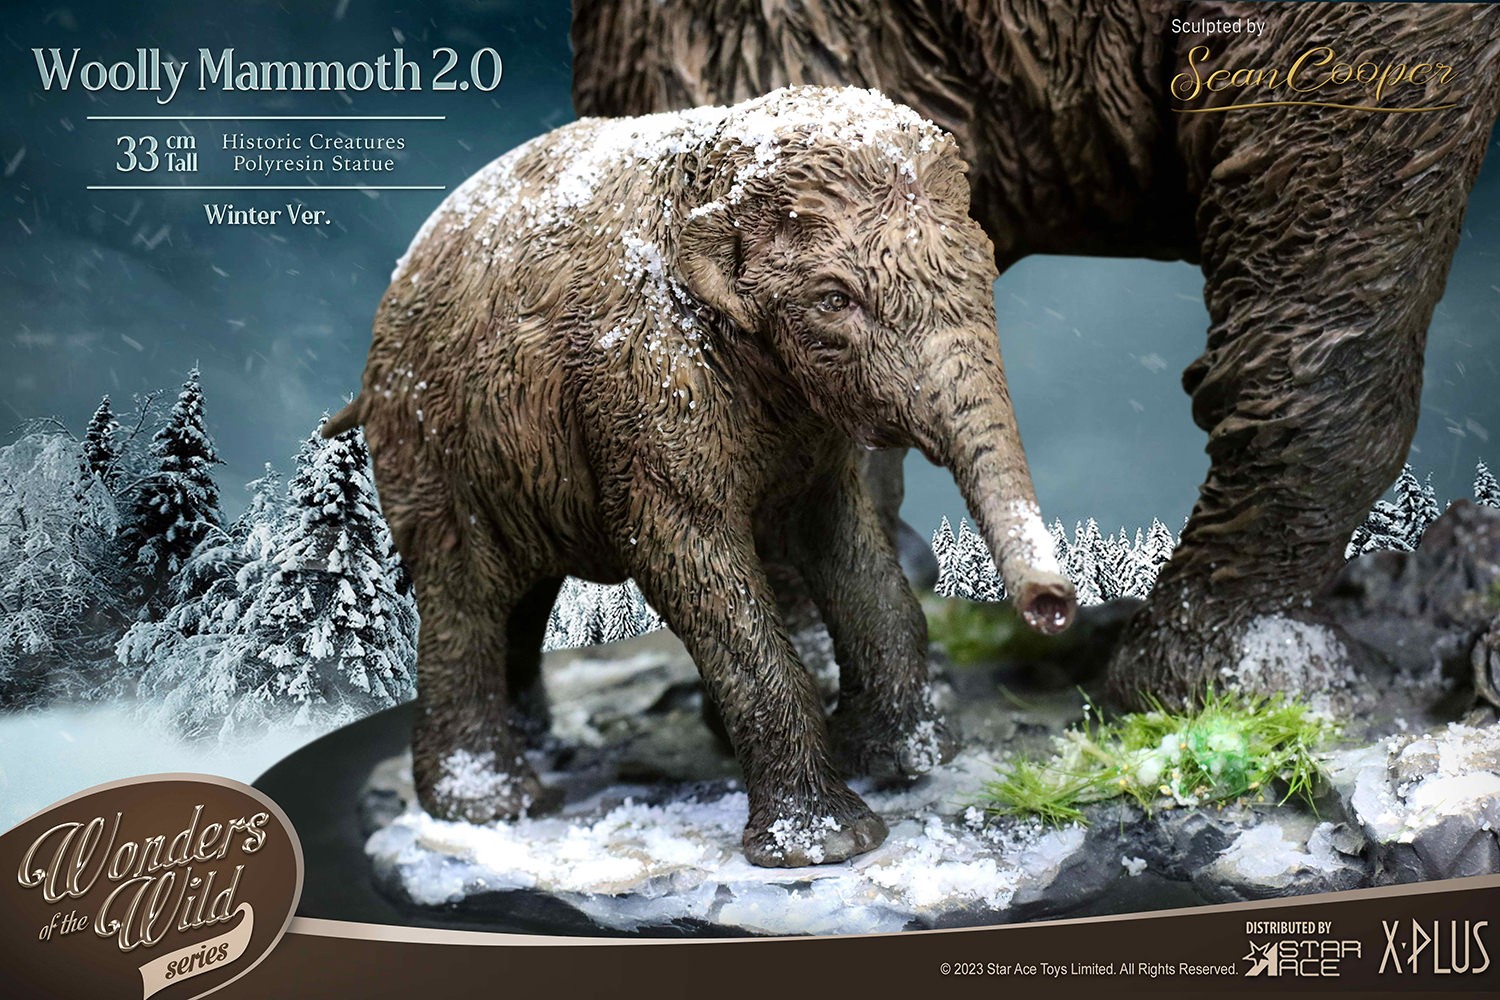 Woolly Mammoth 2.0 (Winter Version) (Prototype Shown) View 4